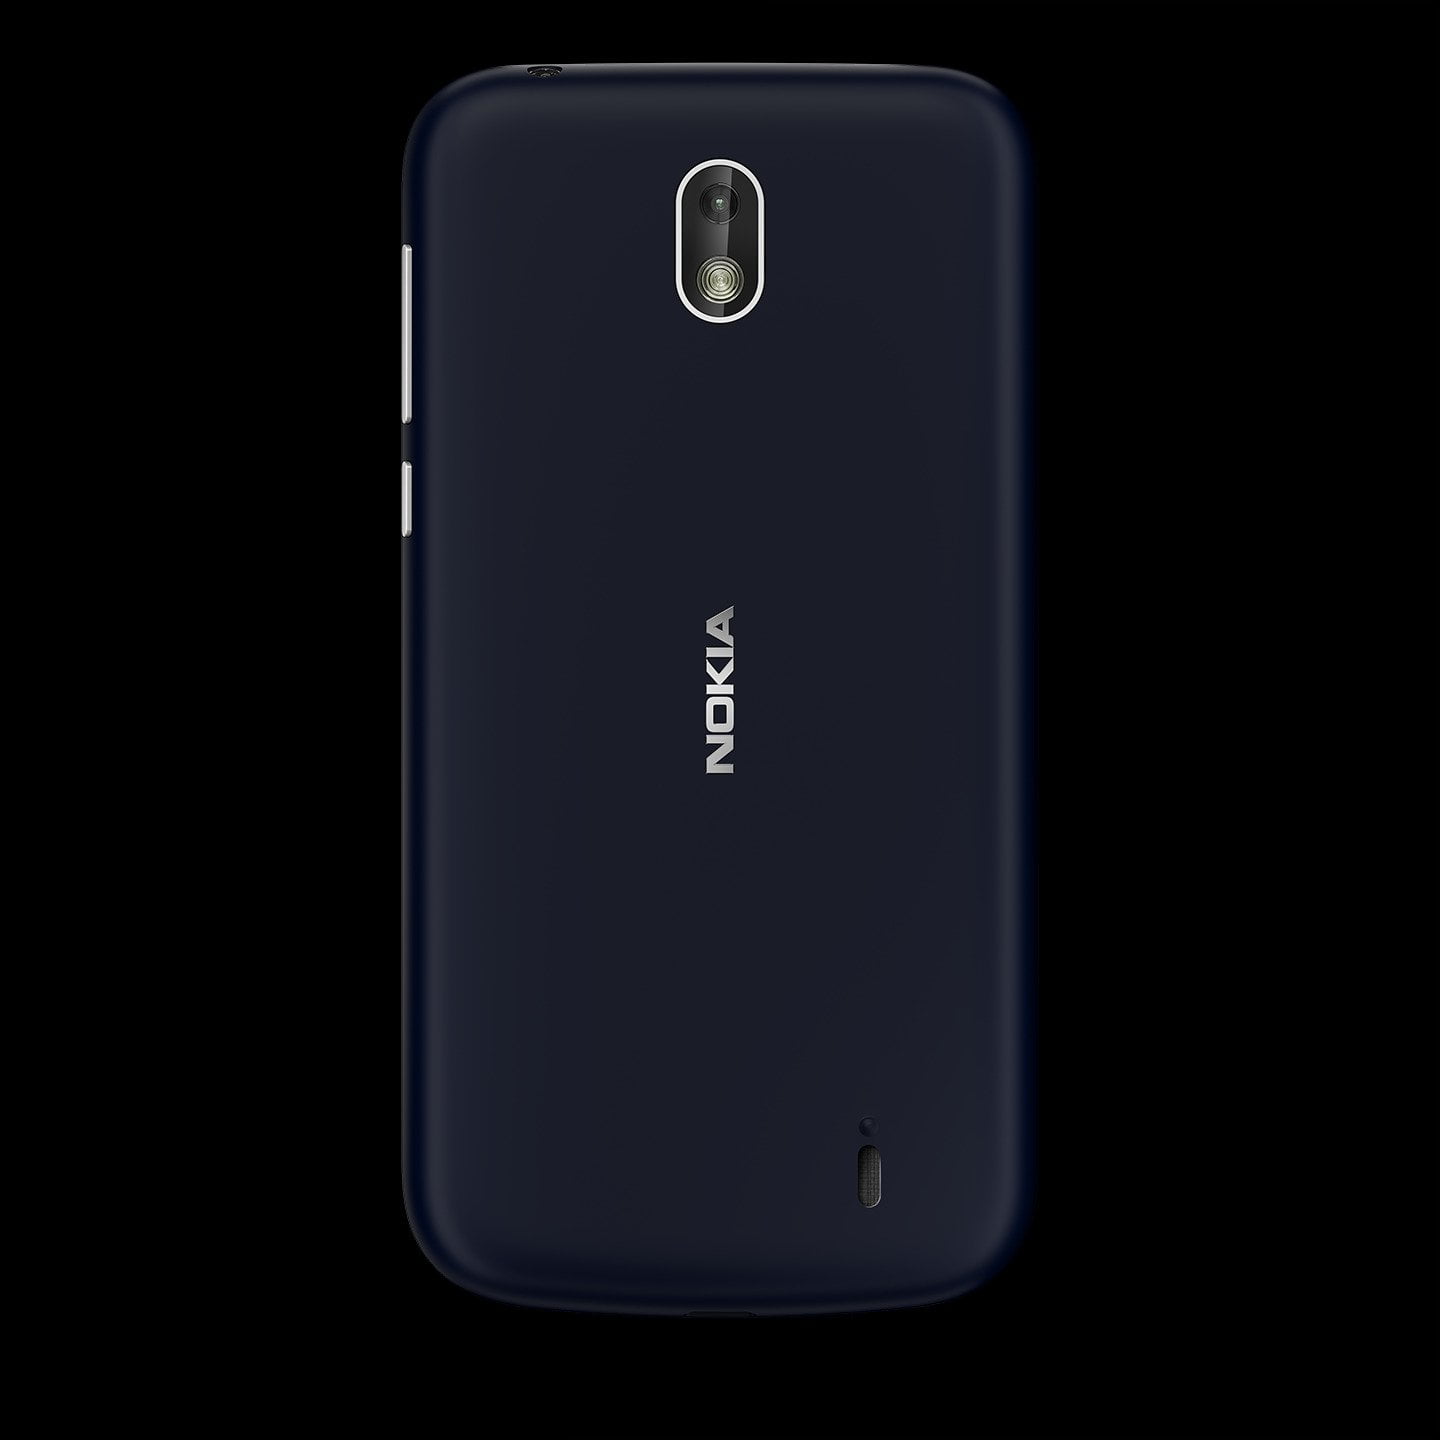 Nokia Is Hitting Canadian Market Full Force With Its New Smartphone Lineup!